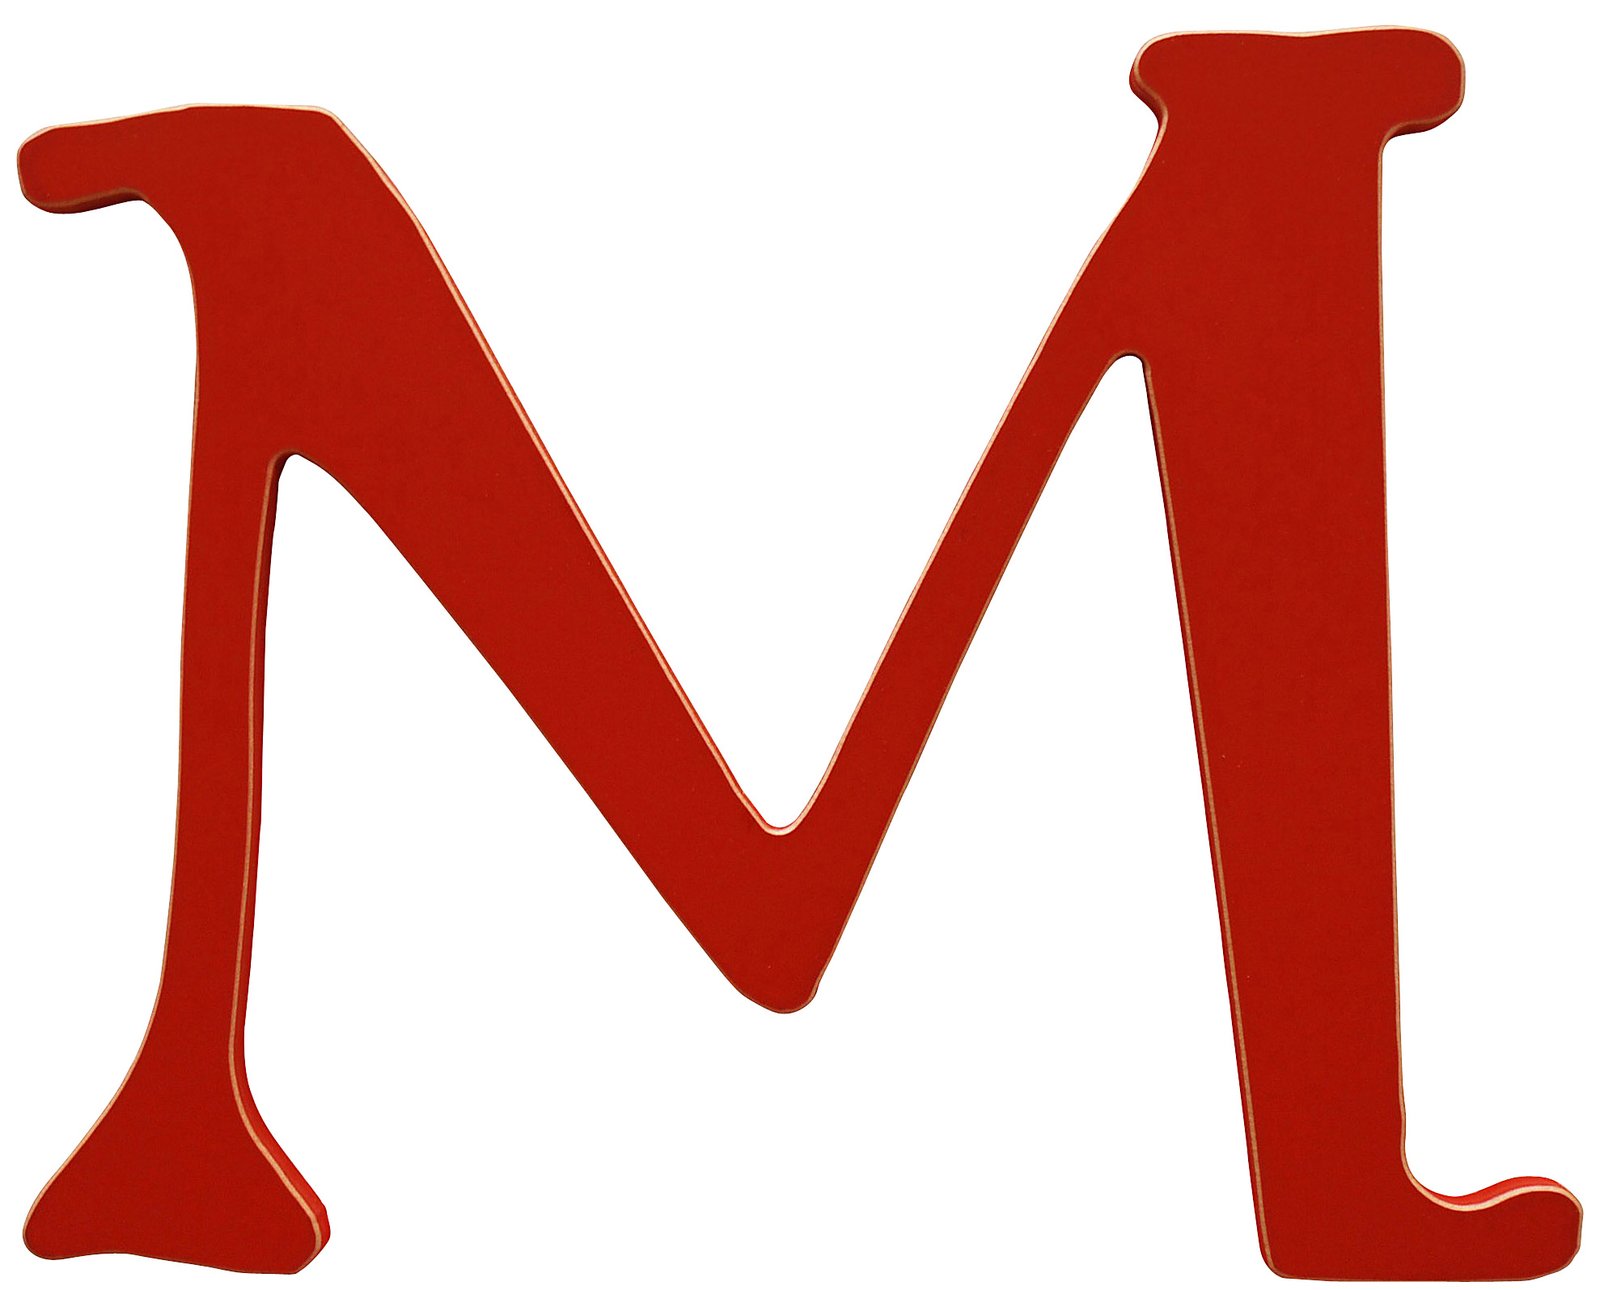 New Arrivals The Letter M Rusty Red Free Shipping #Pij5Ef.